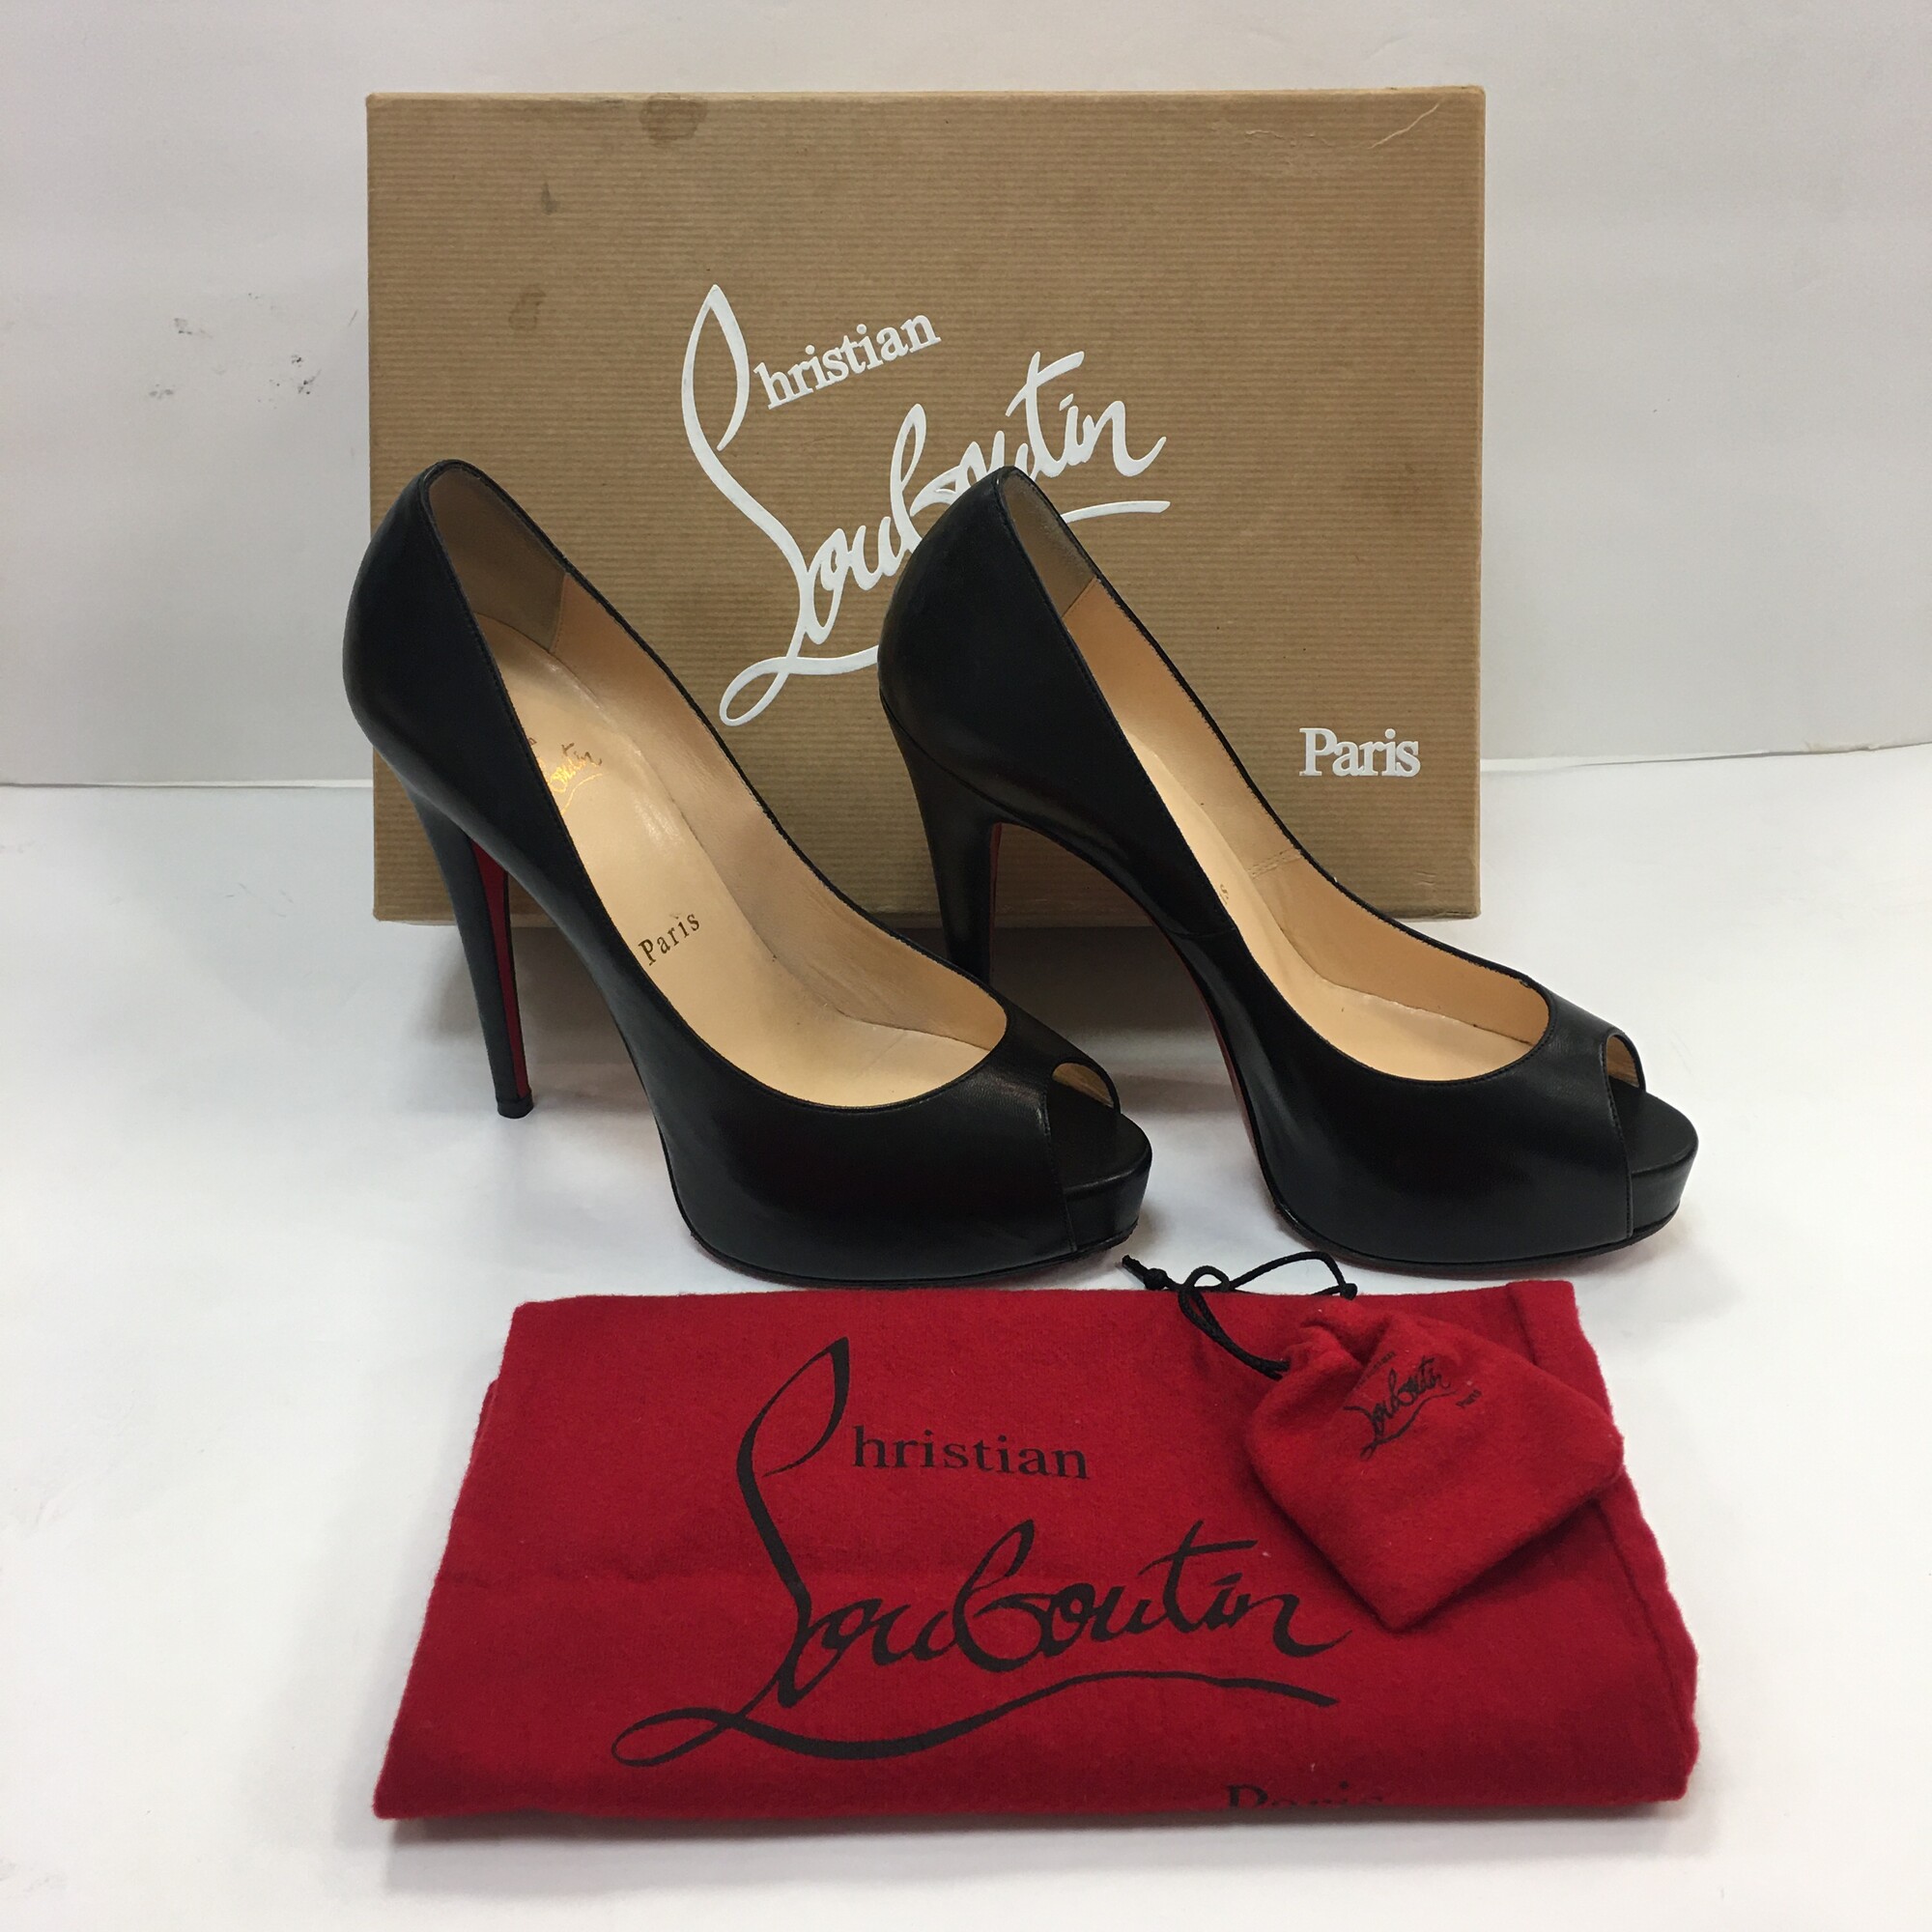 Christian Louboutin Platform open toe pumps.
Size 37 (equivalent to a size 7)
As Is condition: some scuffing throughout the outside of the shoes. Wear on the sole portion and slight wear on the interior (mostly near the toe portion). Please refer to photos.
If you need additional information or photos, please contact the store!